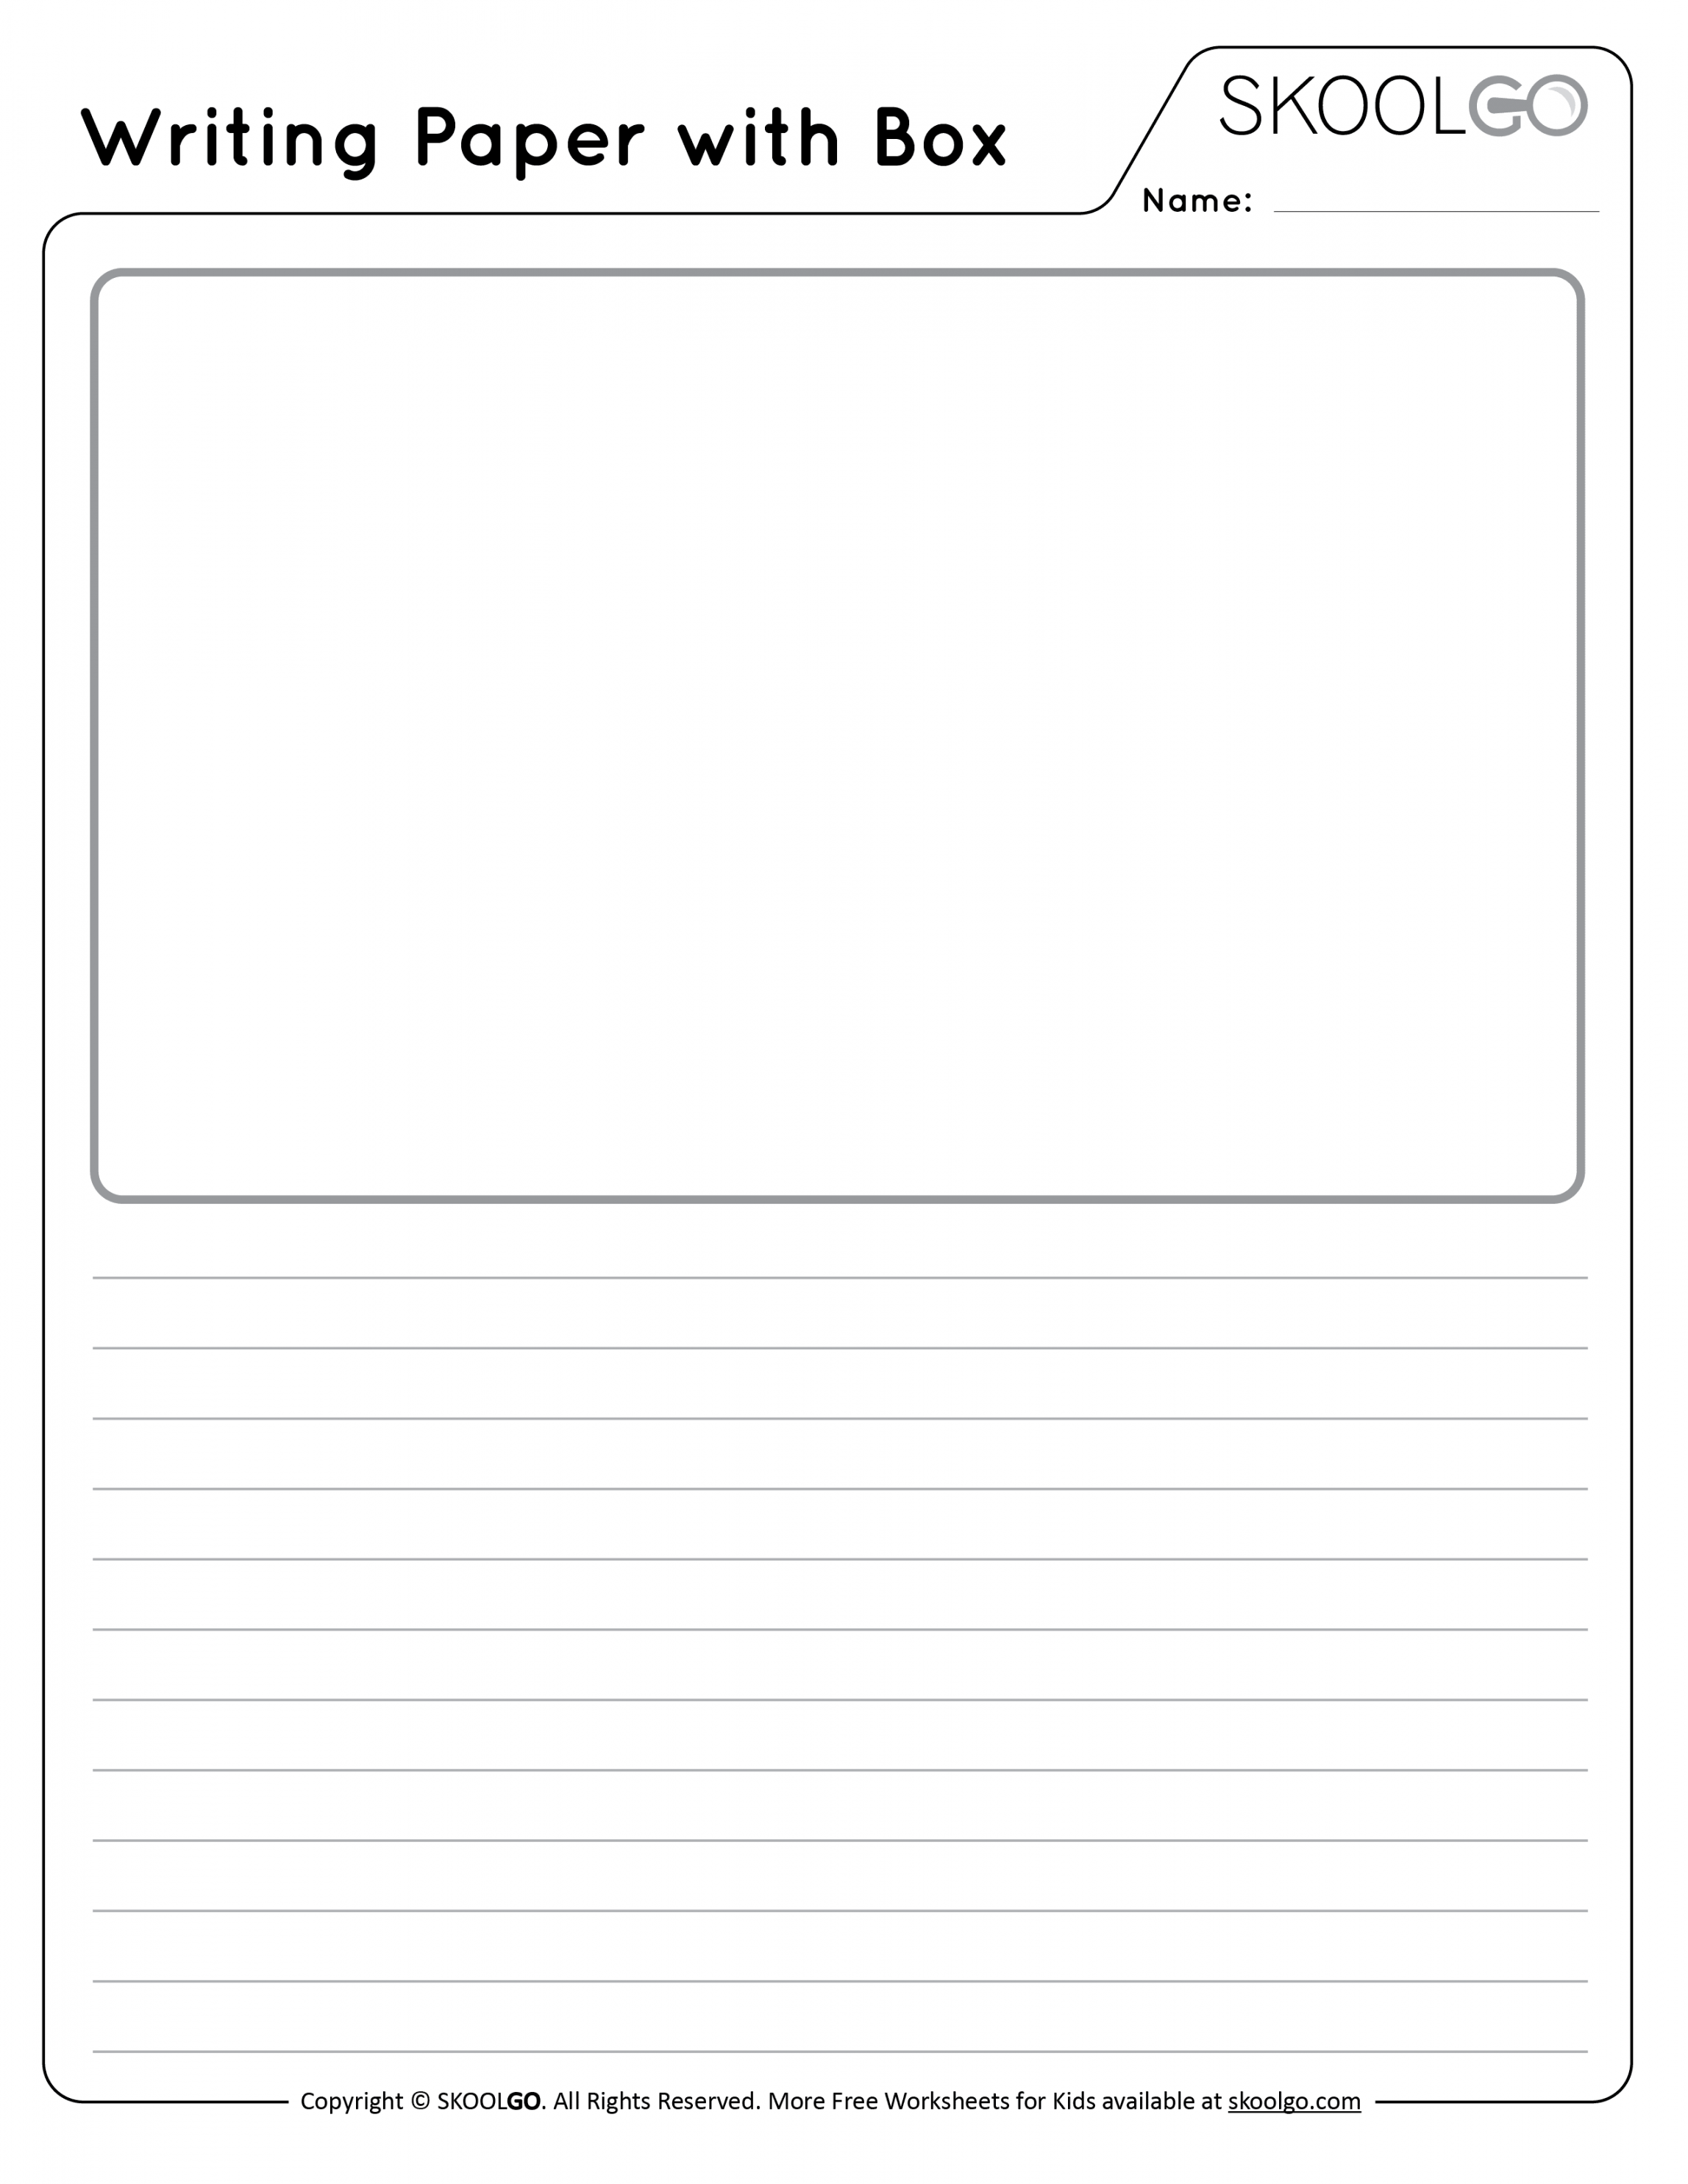 Writing Paper with Picture Box - Free Worksheet for Kids - FREE Printables - Lined Paper With Picture Box